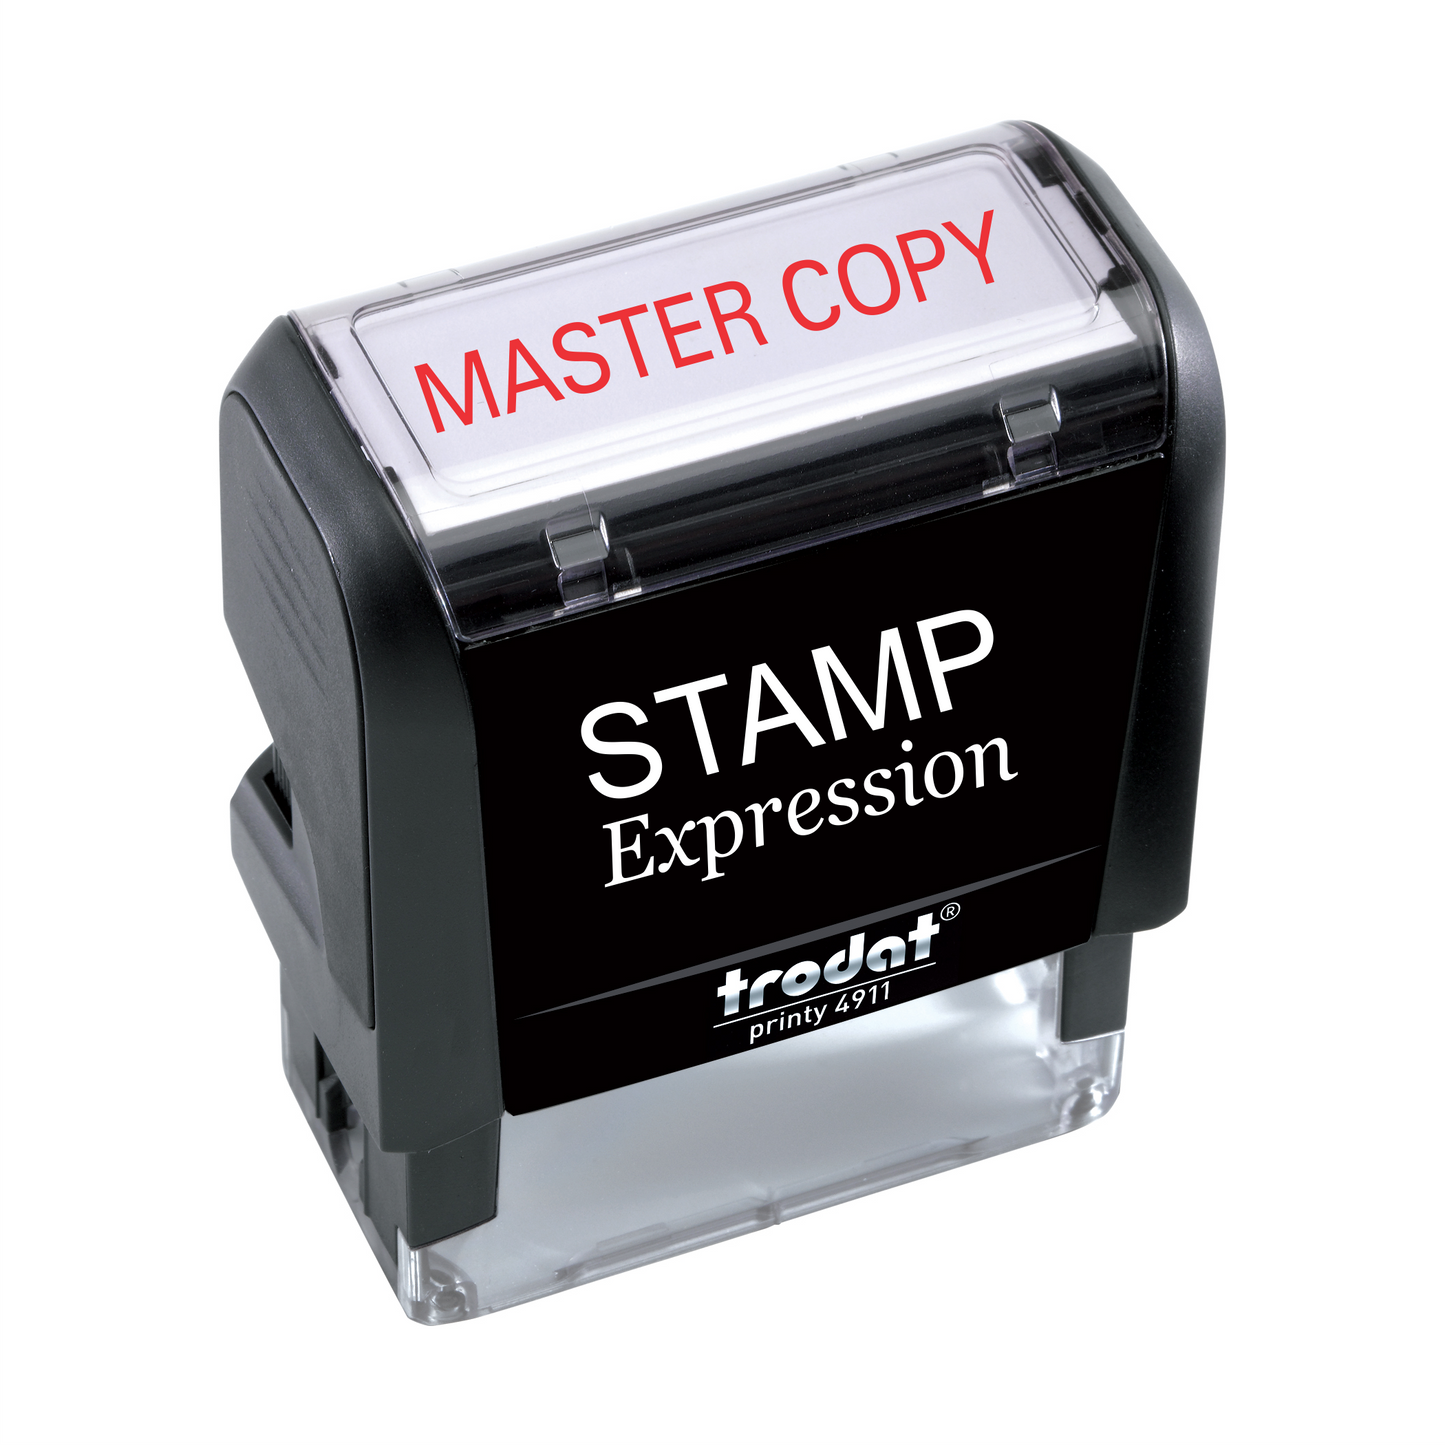 Master Copy Office Self Inking Rubber Stamp (SH-5323)